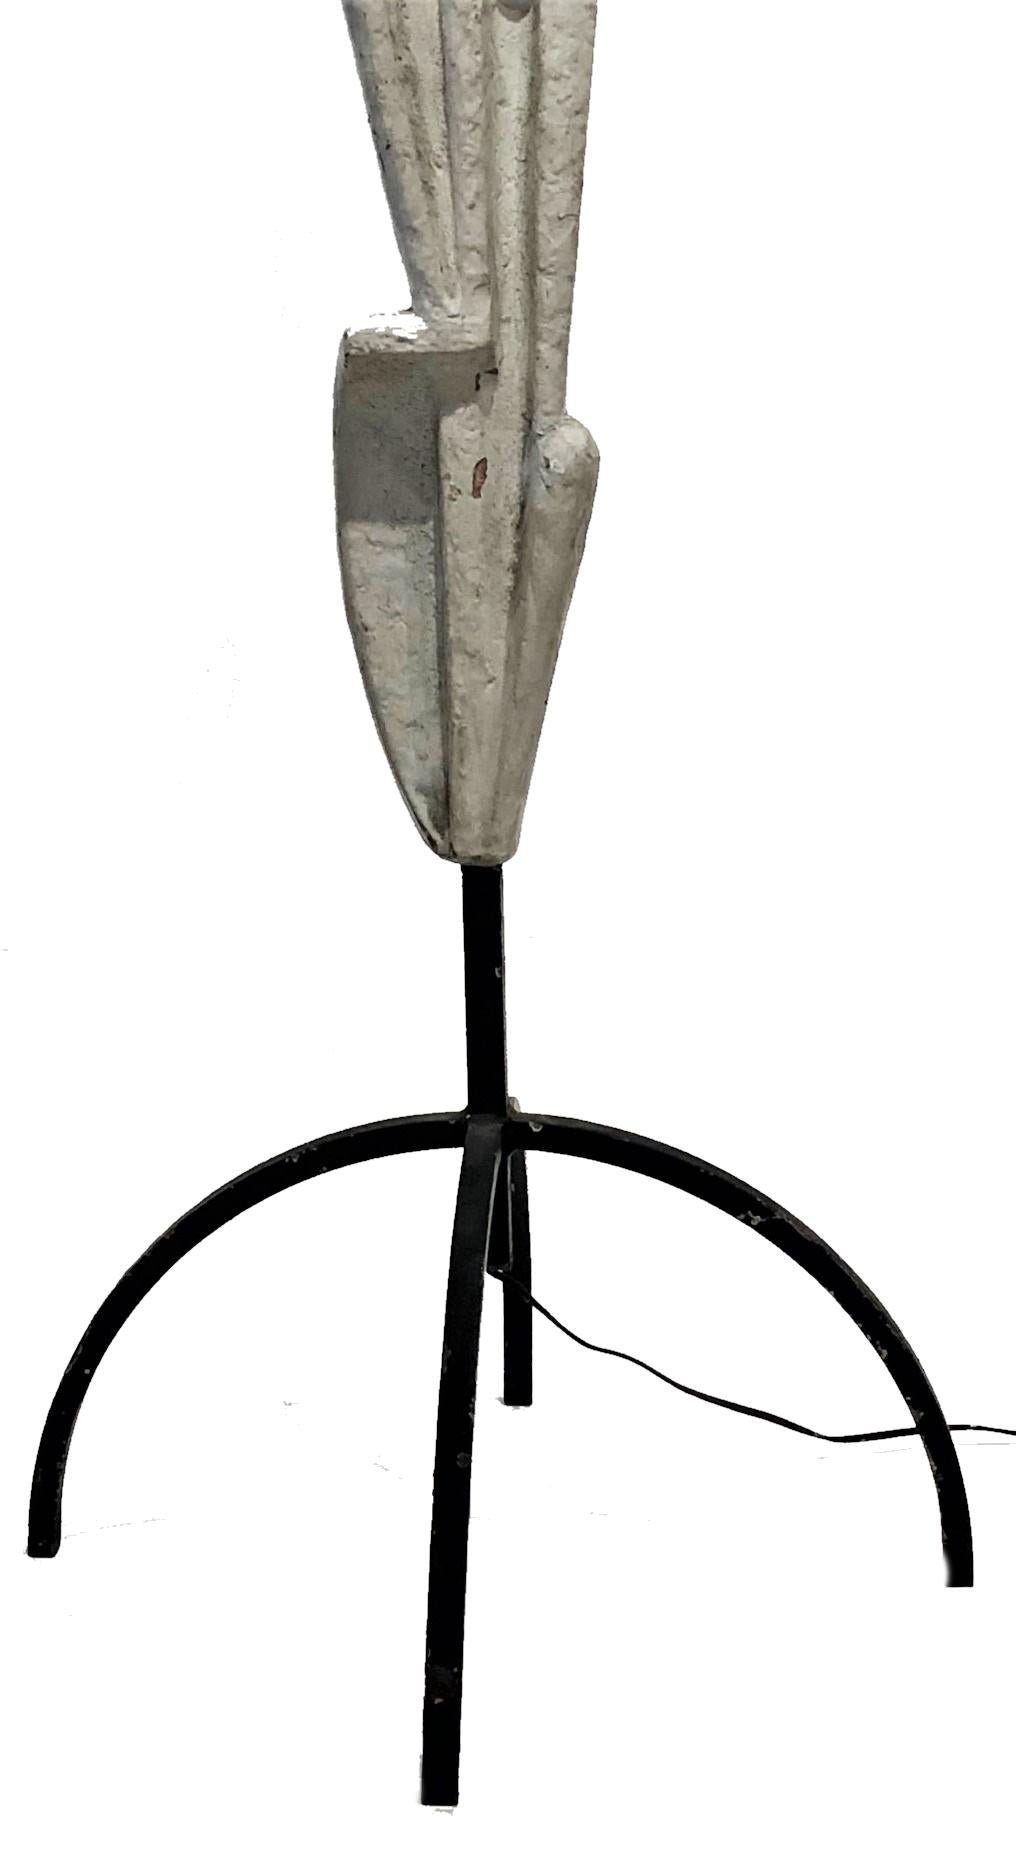 20th Century Modernist Floor Lamp in Alberto Giacometti Manner, Late XX Century For Sale